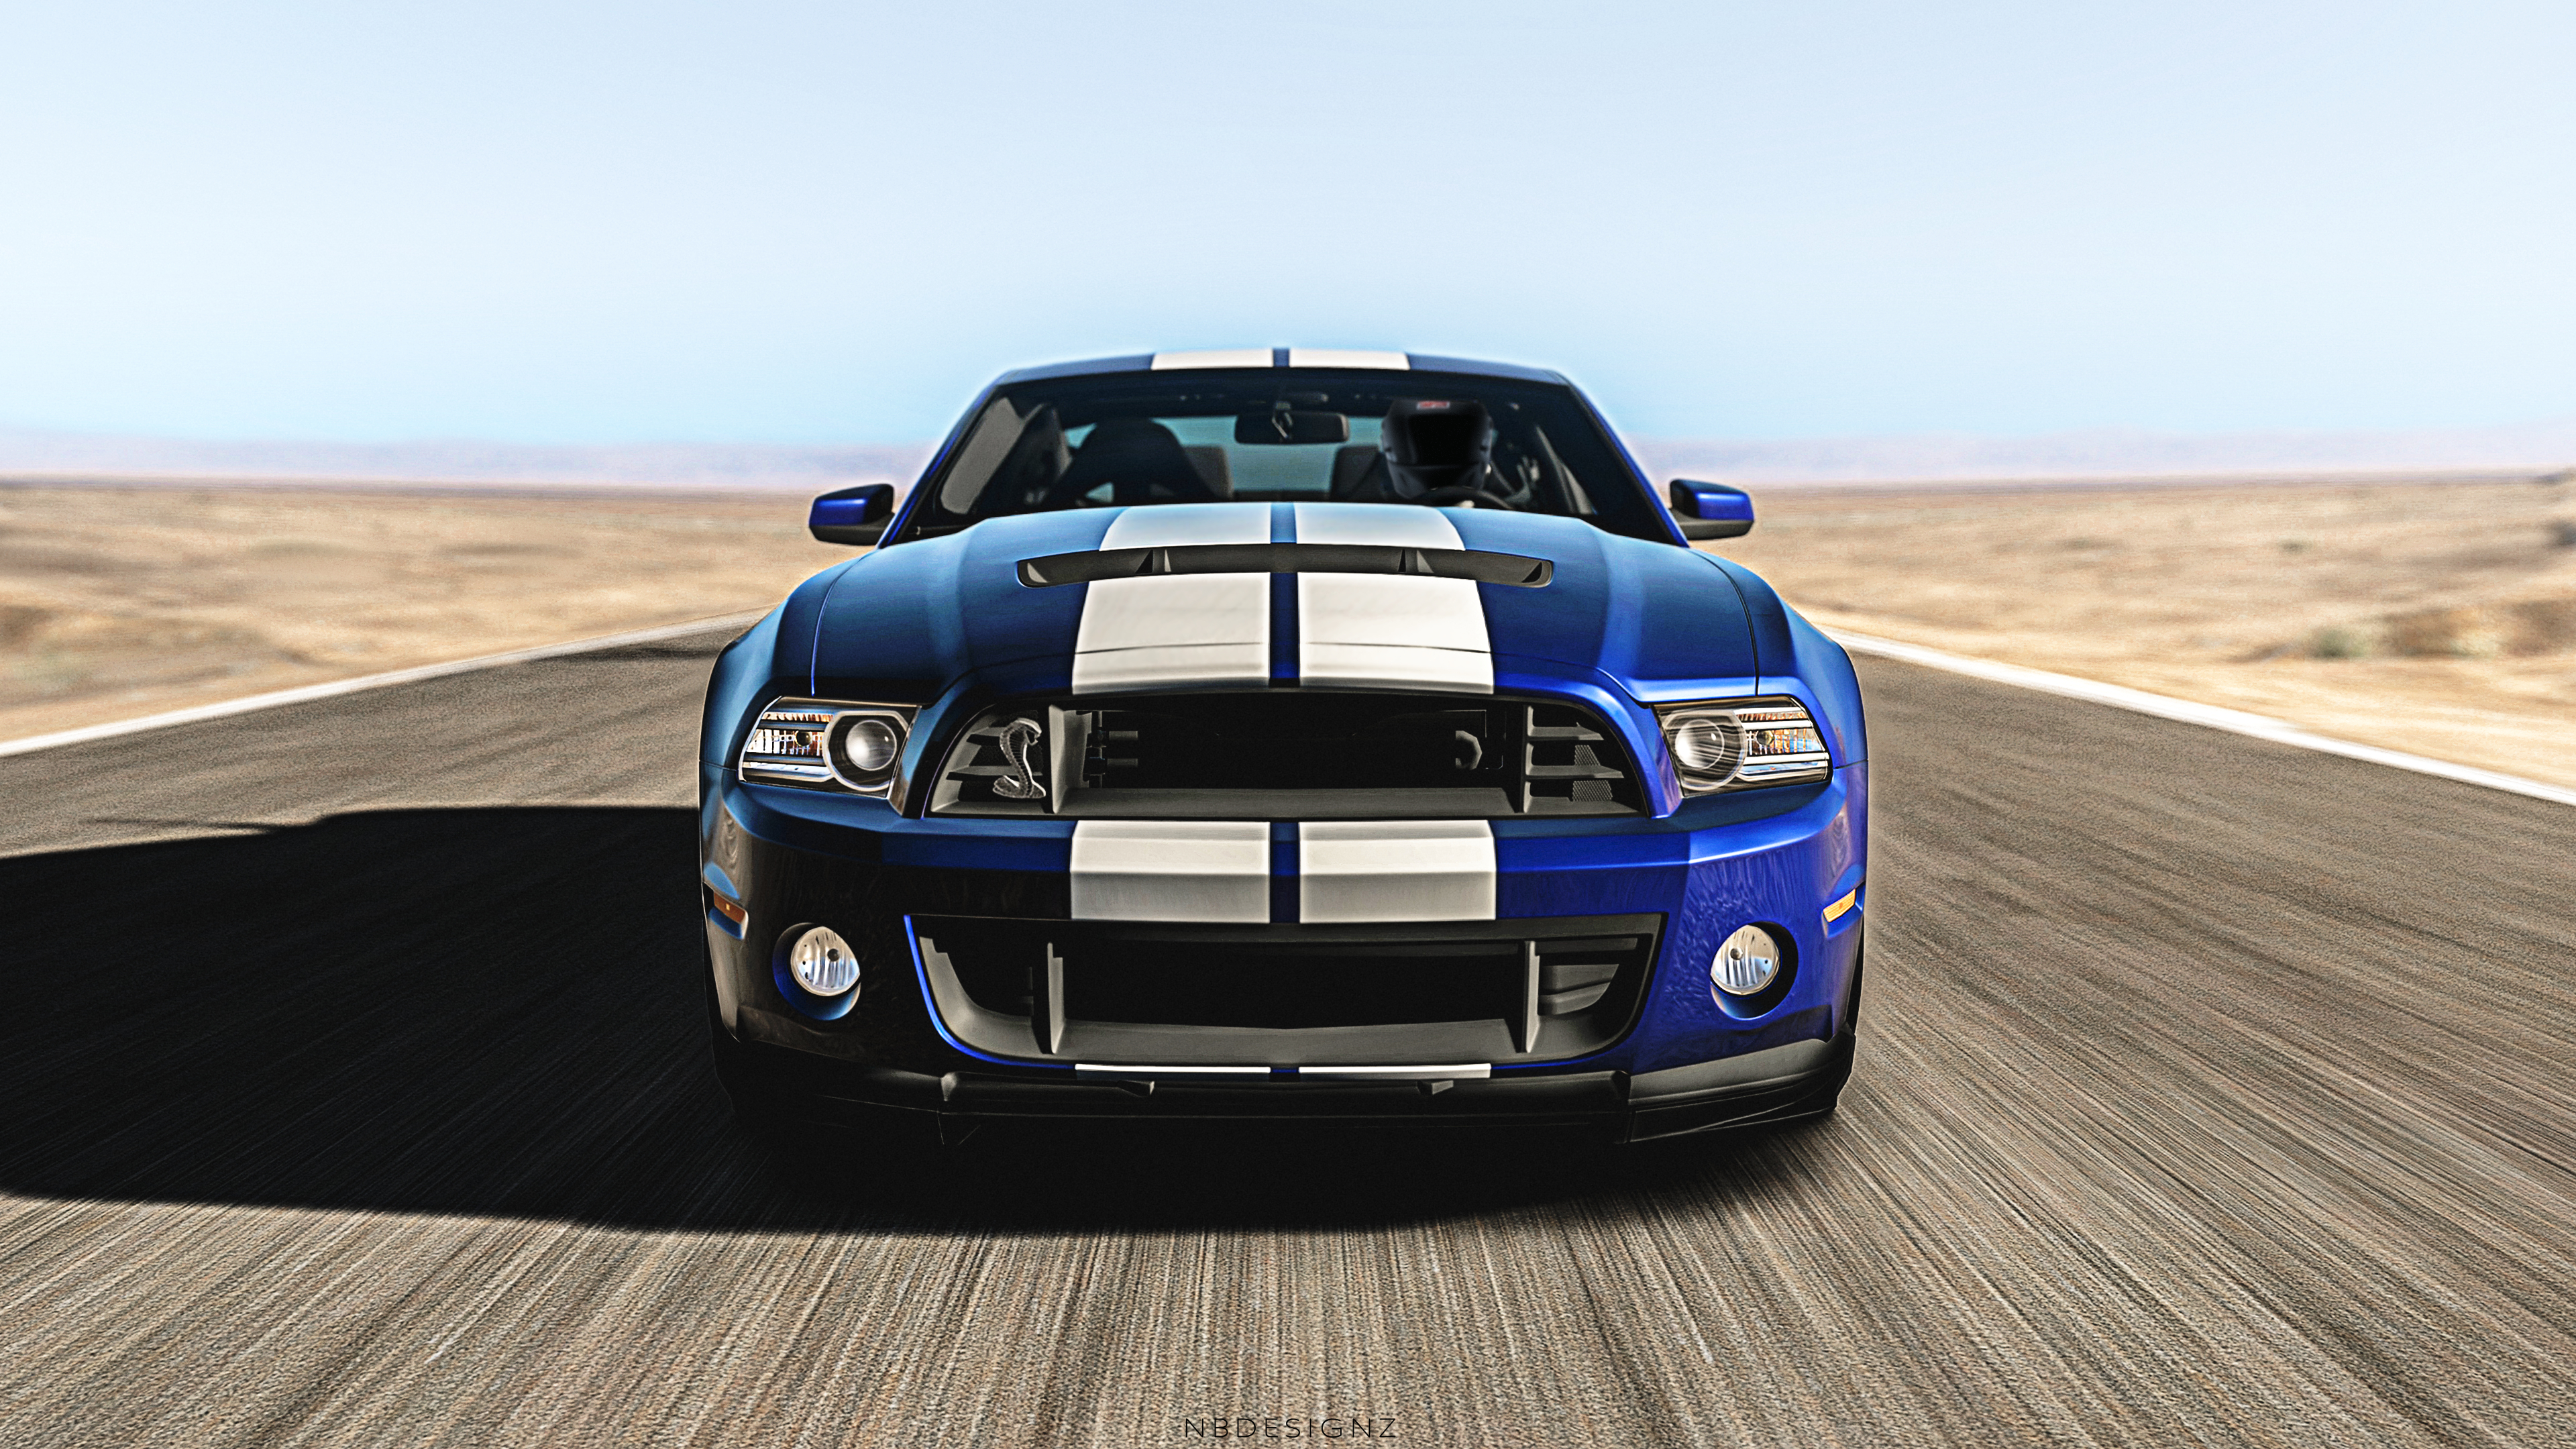 Wallpaper hood Sony USA sports car Ford Shelby coupe 3840x2160